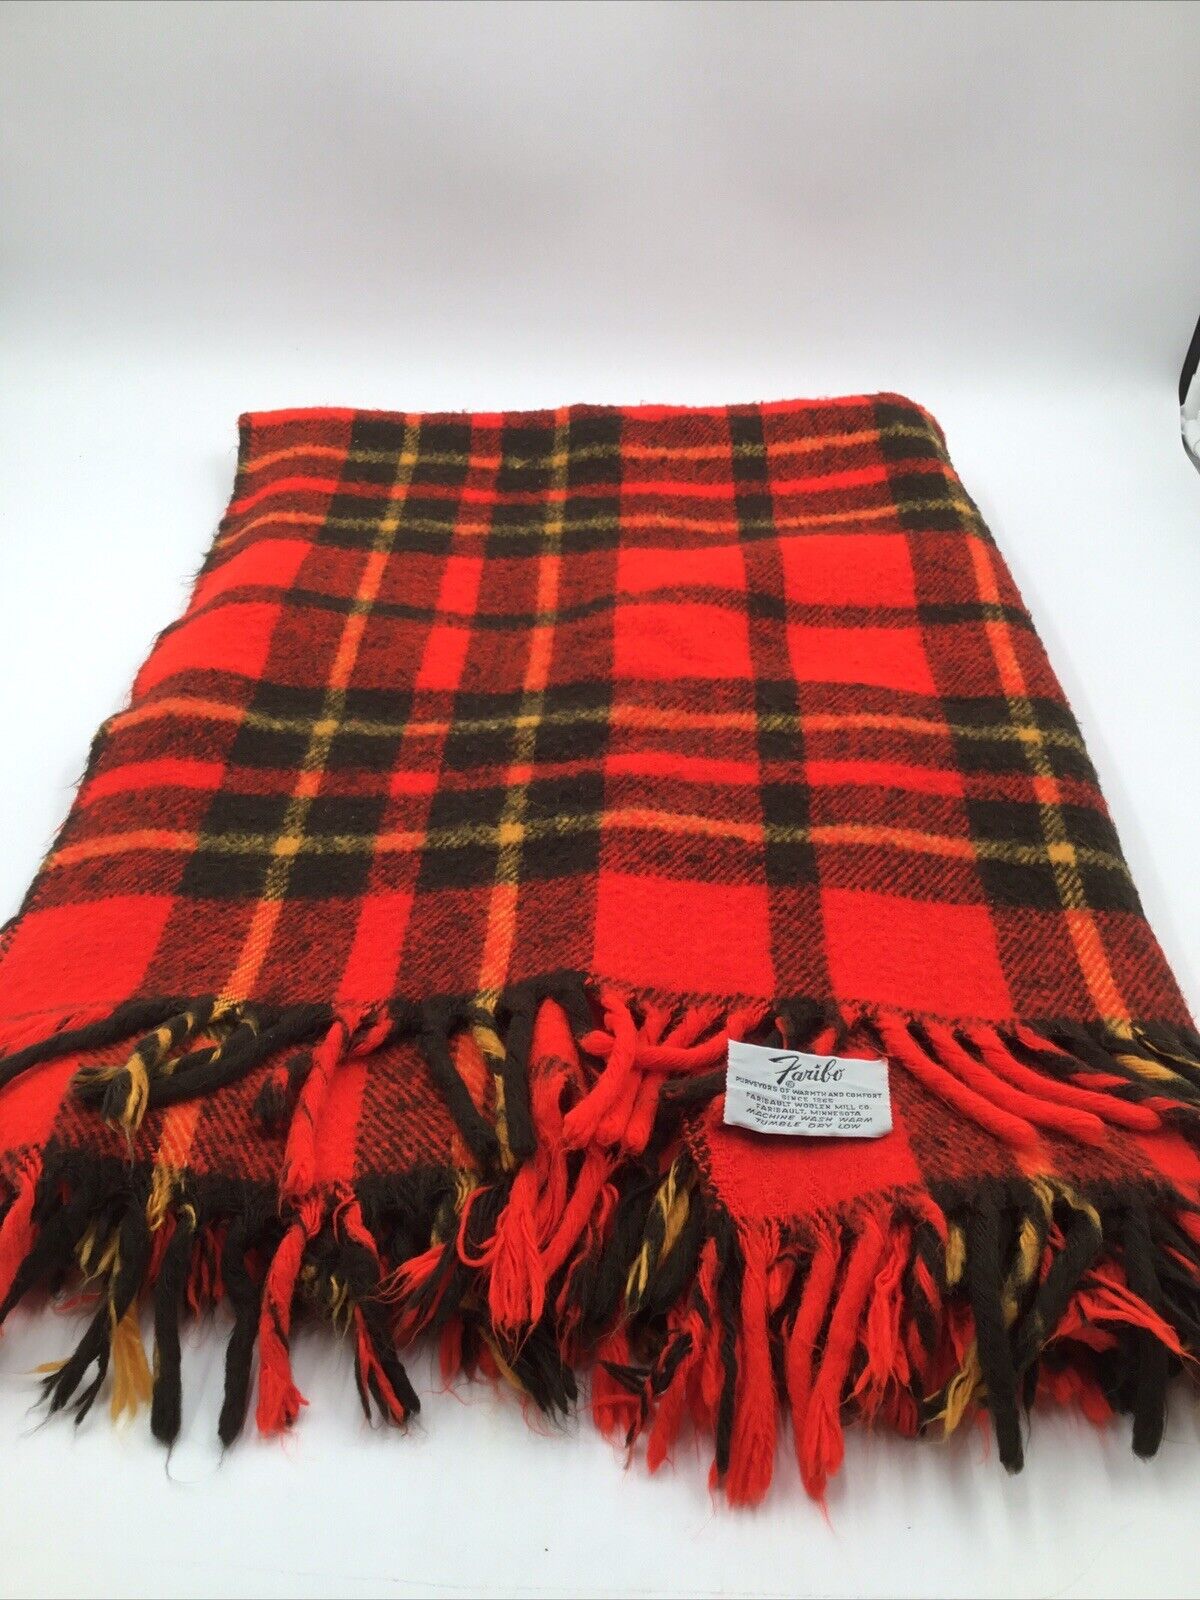 Vintage Faribo Wool Plaid With Fringe Throw Blanket Approximately- 60”x 50”